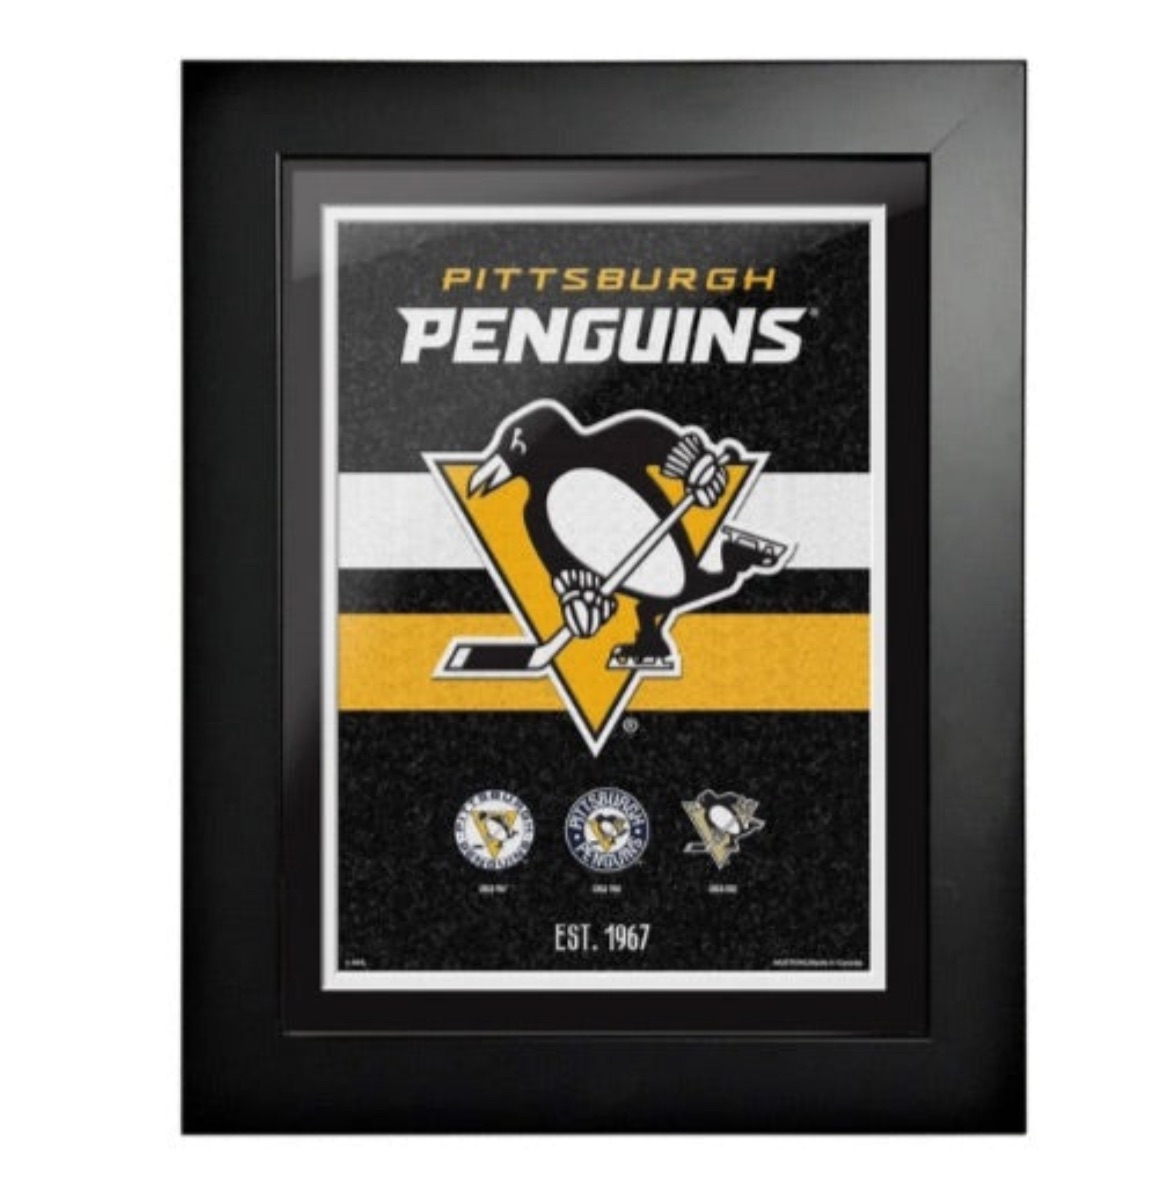 Framed Hockey Plaques - Available in 6 Styles